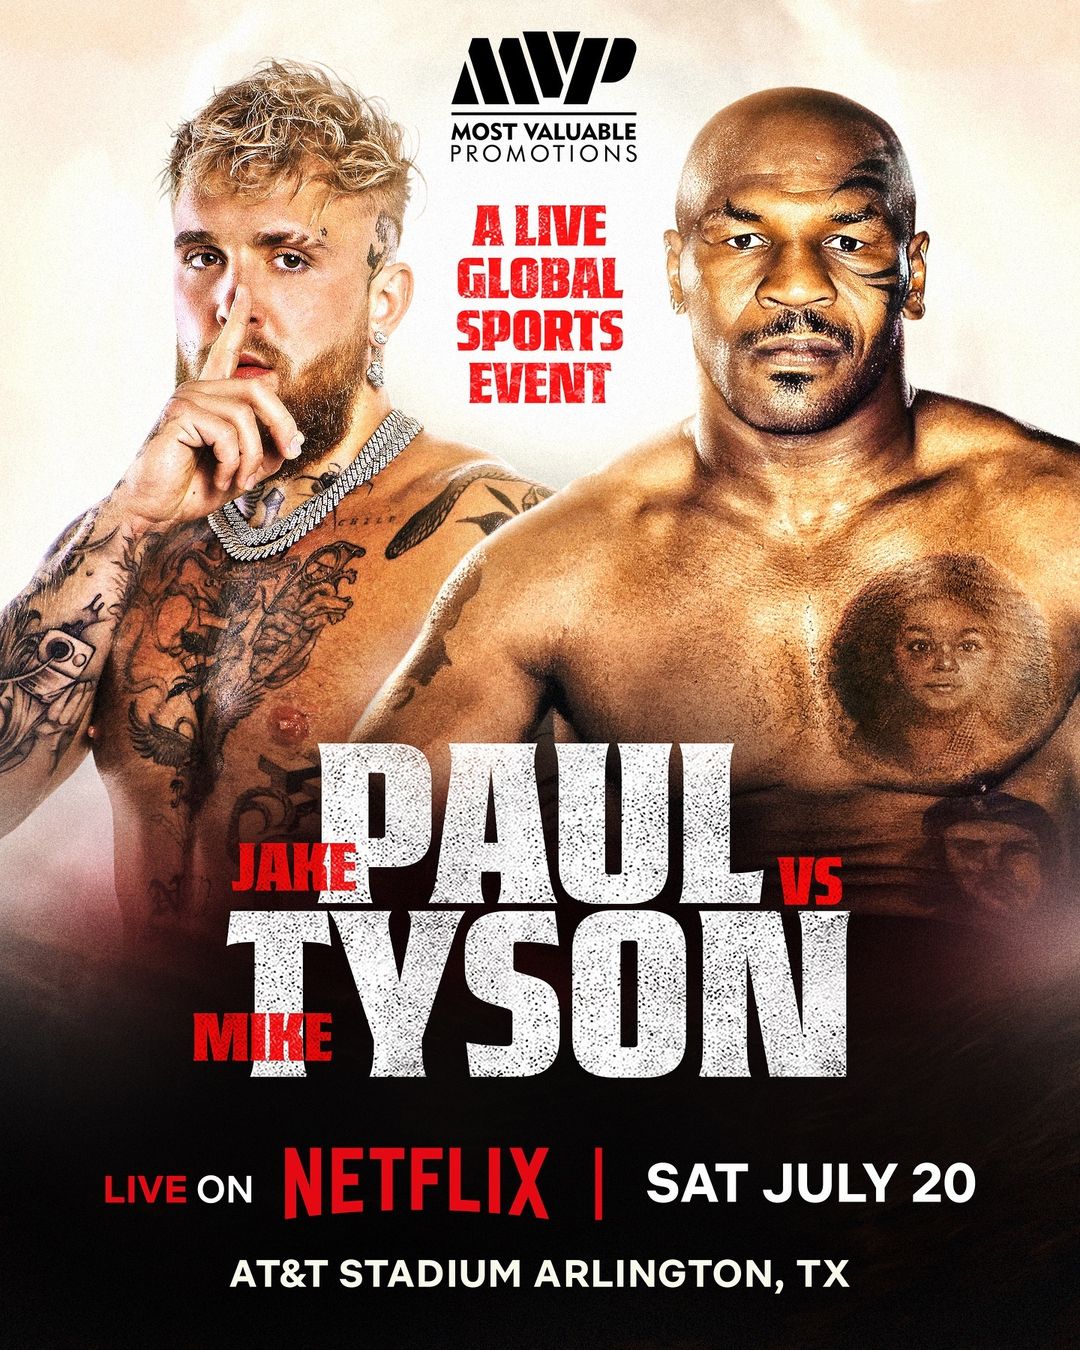 Jake Paul vs Mike Tyson Who Is More Likely To Win The Netflix Fight?